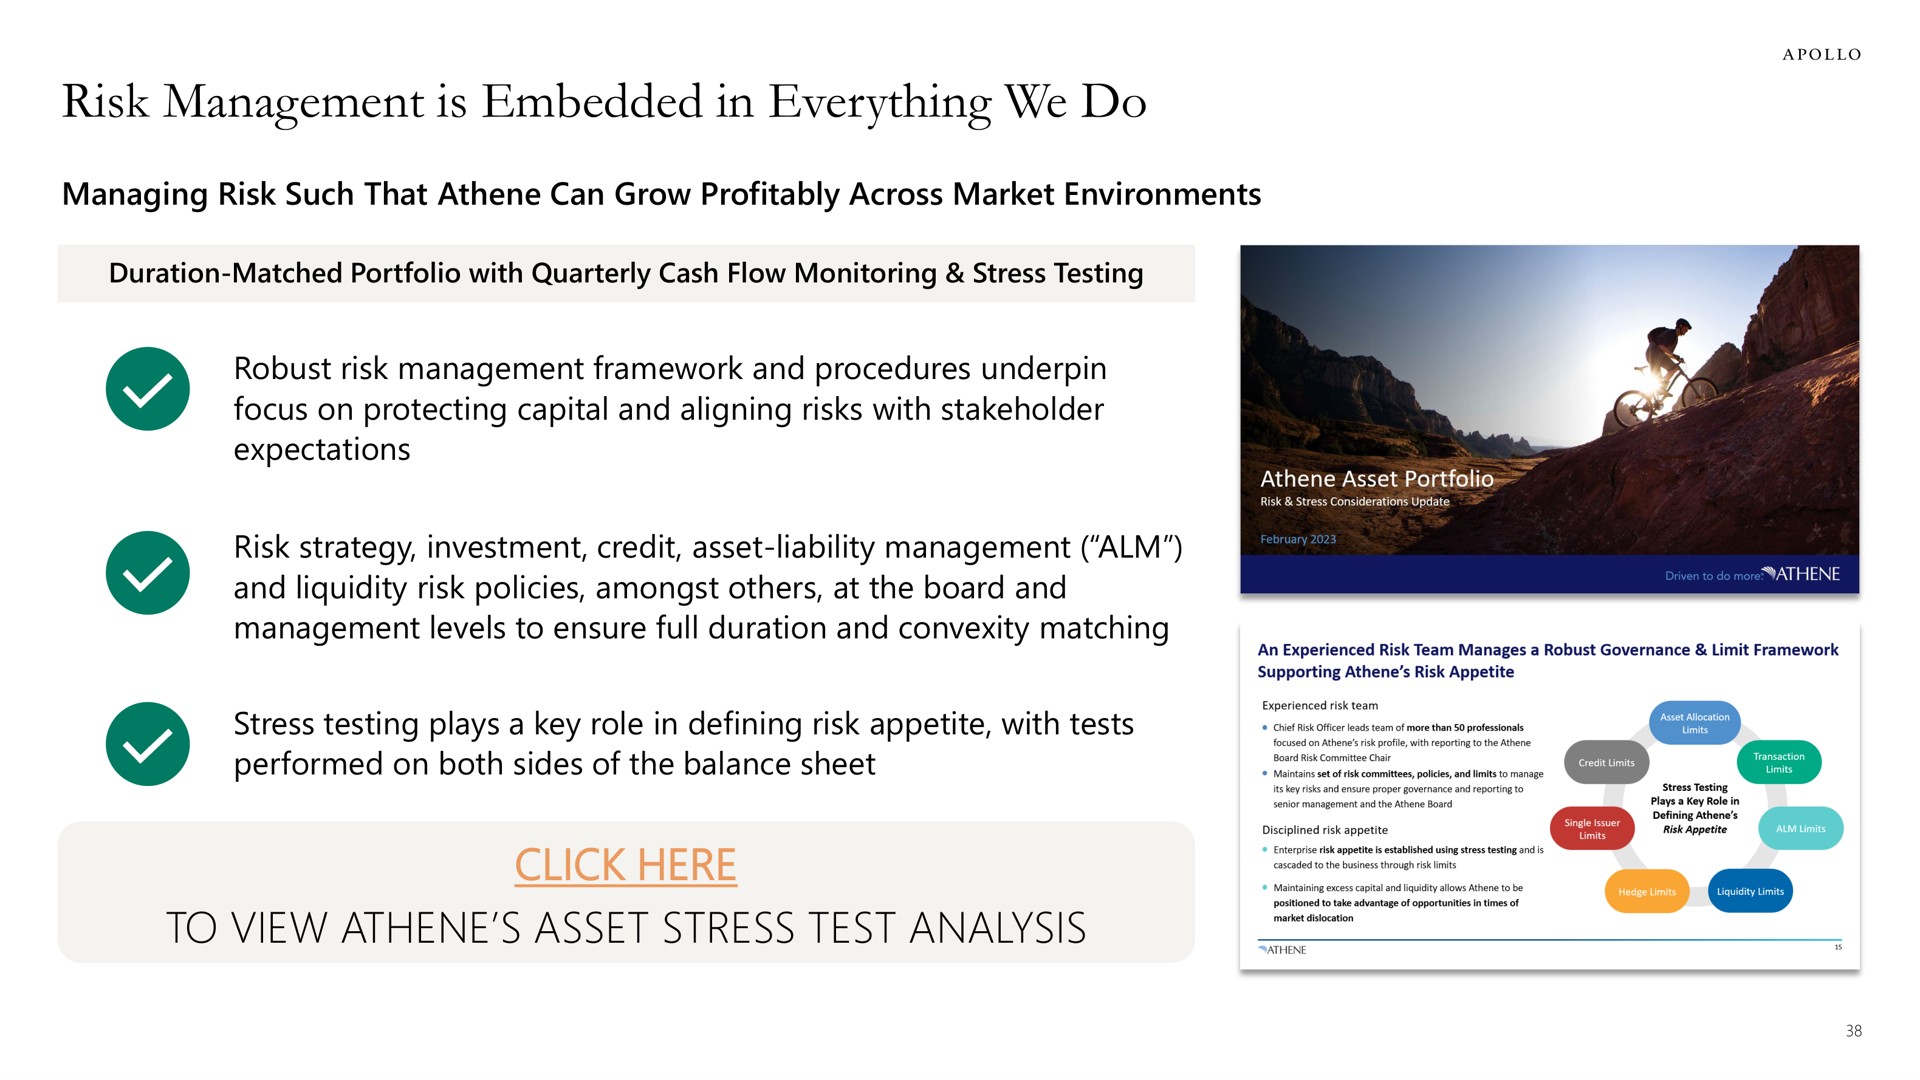 risk management is embedded in everything we do click here to view asset stress test analysis | Apollo Global Management